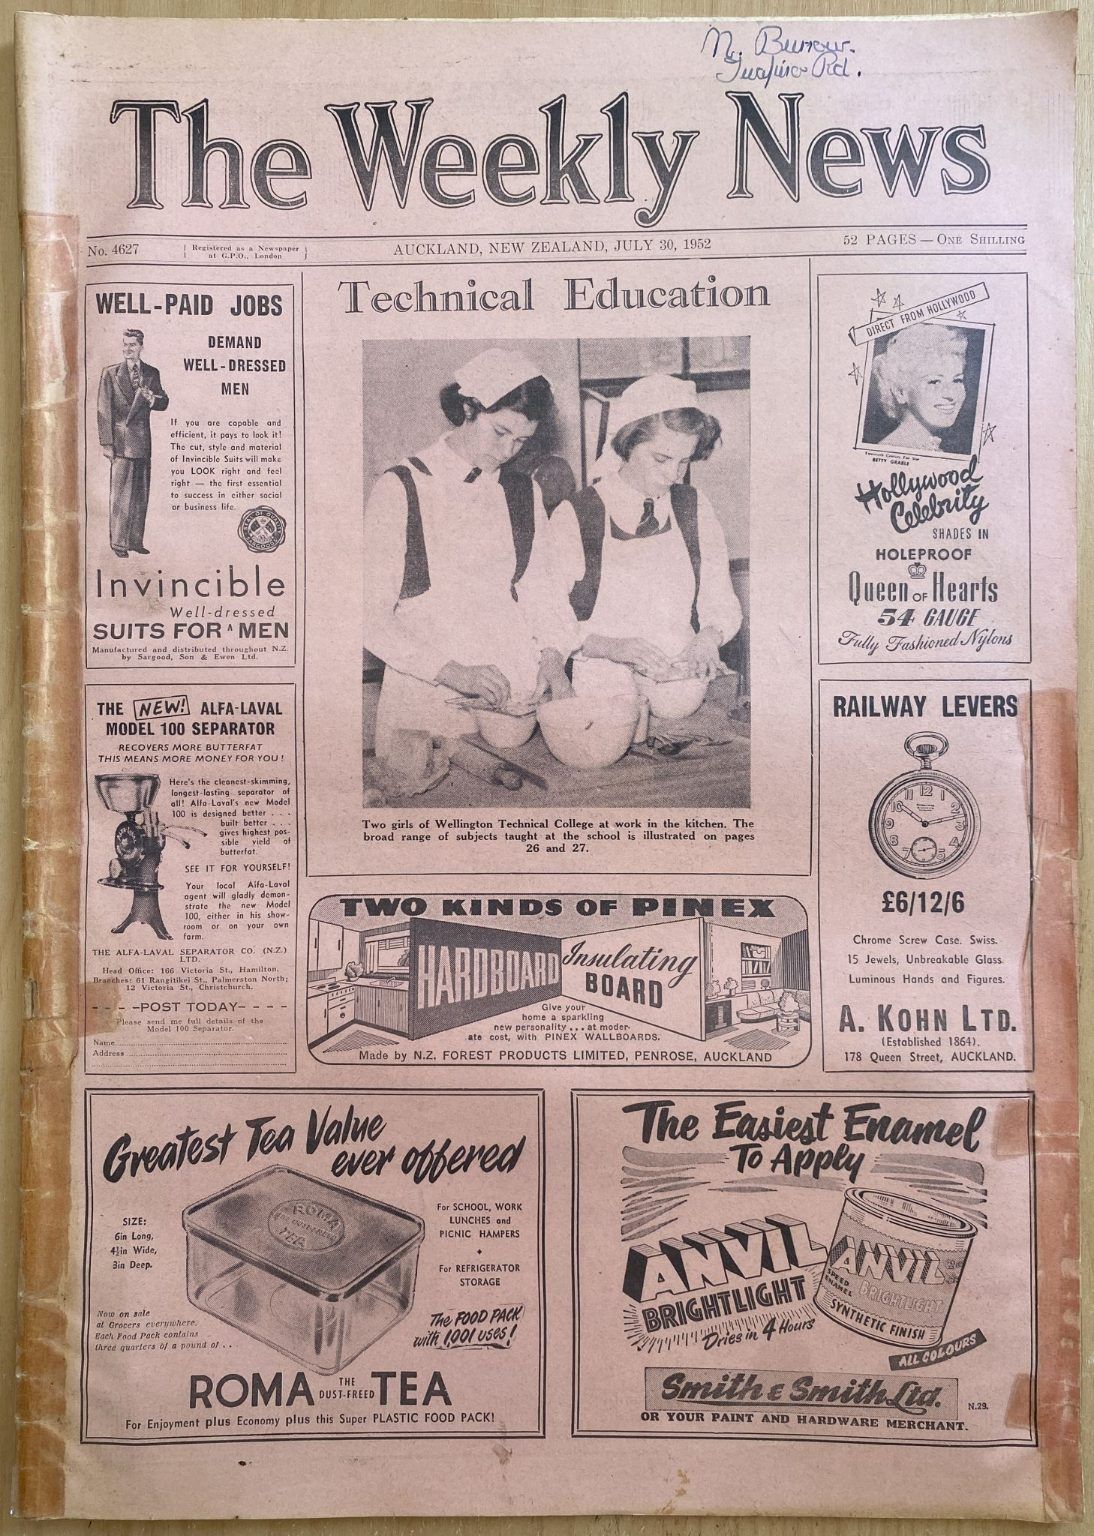 OLD NEWSPAPER: The Weekly News - No. 4627, 30 July 1952